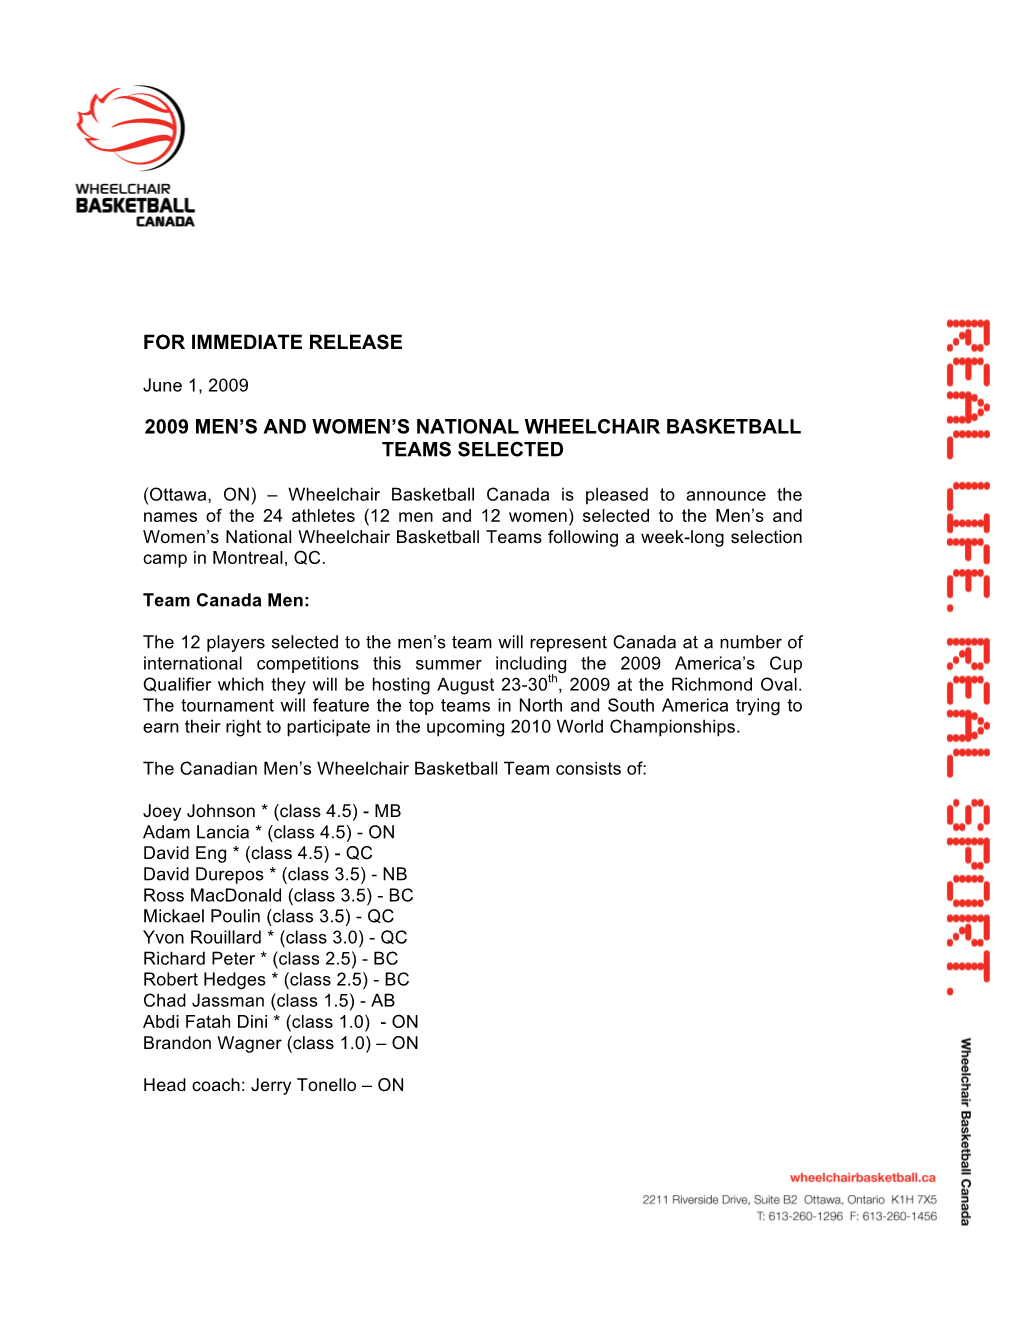 For Immediate Release 2009 Men's and Women's National Wheelchair Basketball Teams Selected